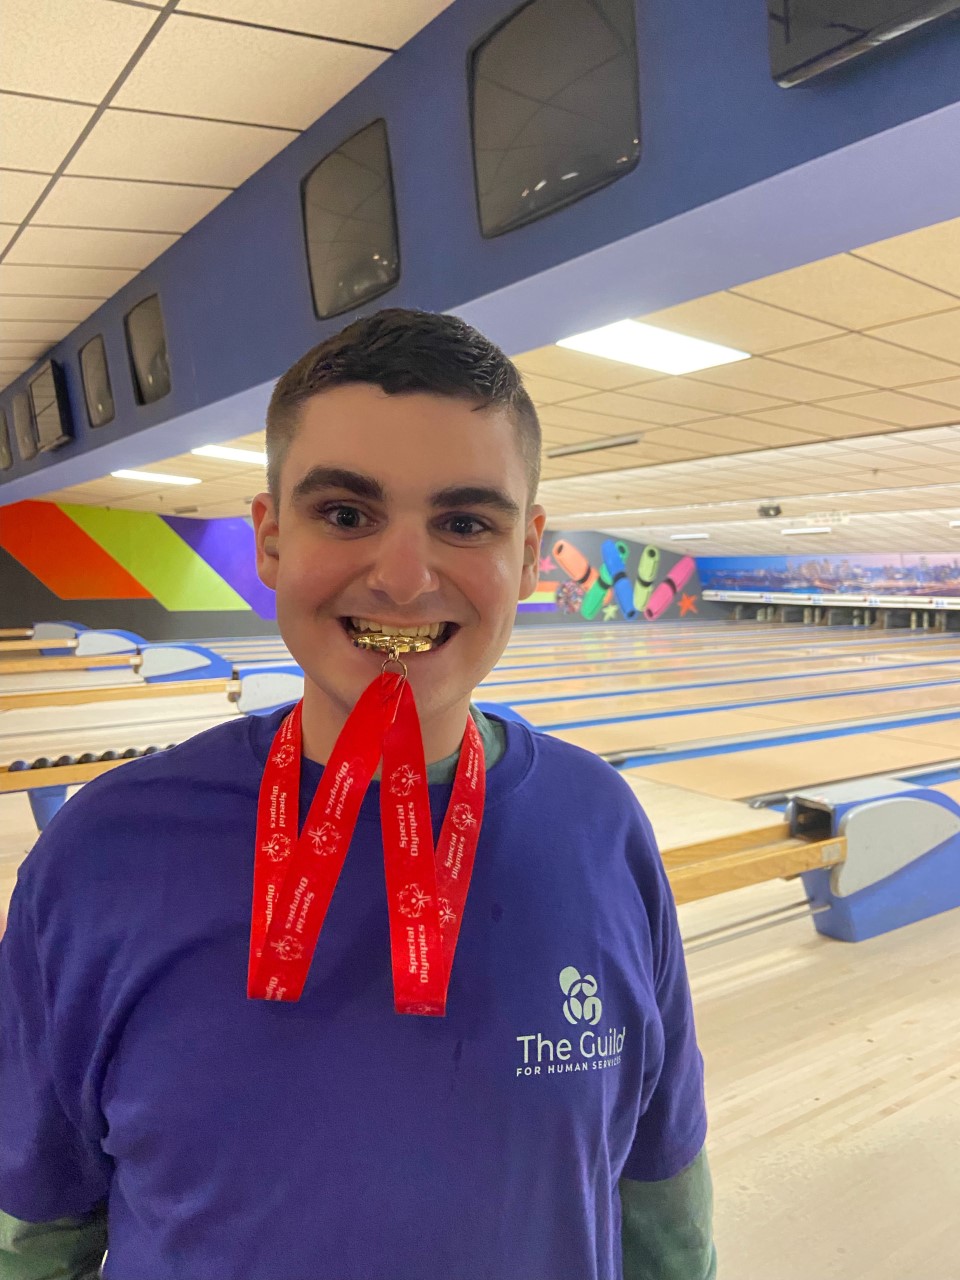 Guild student at Special Olympics bowling competition